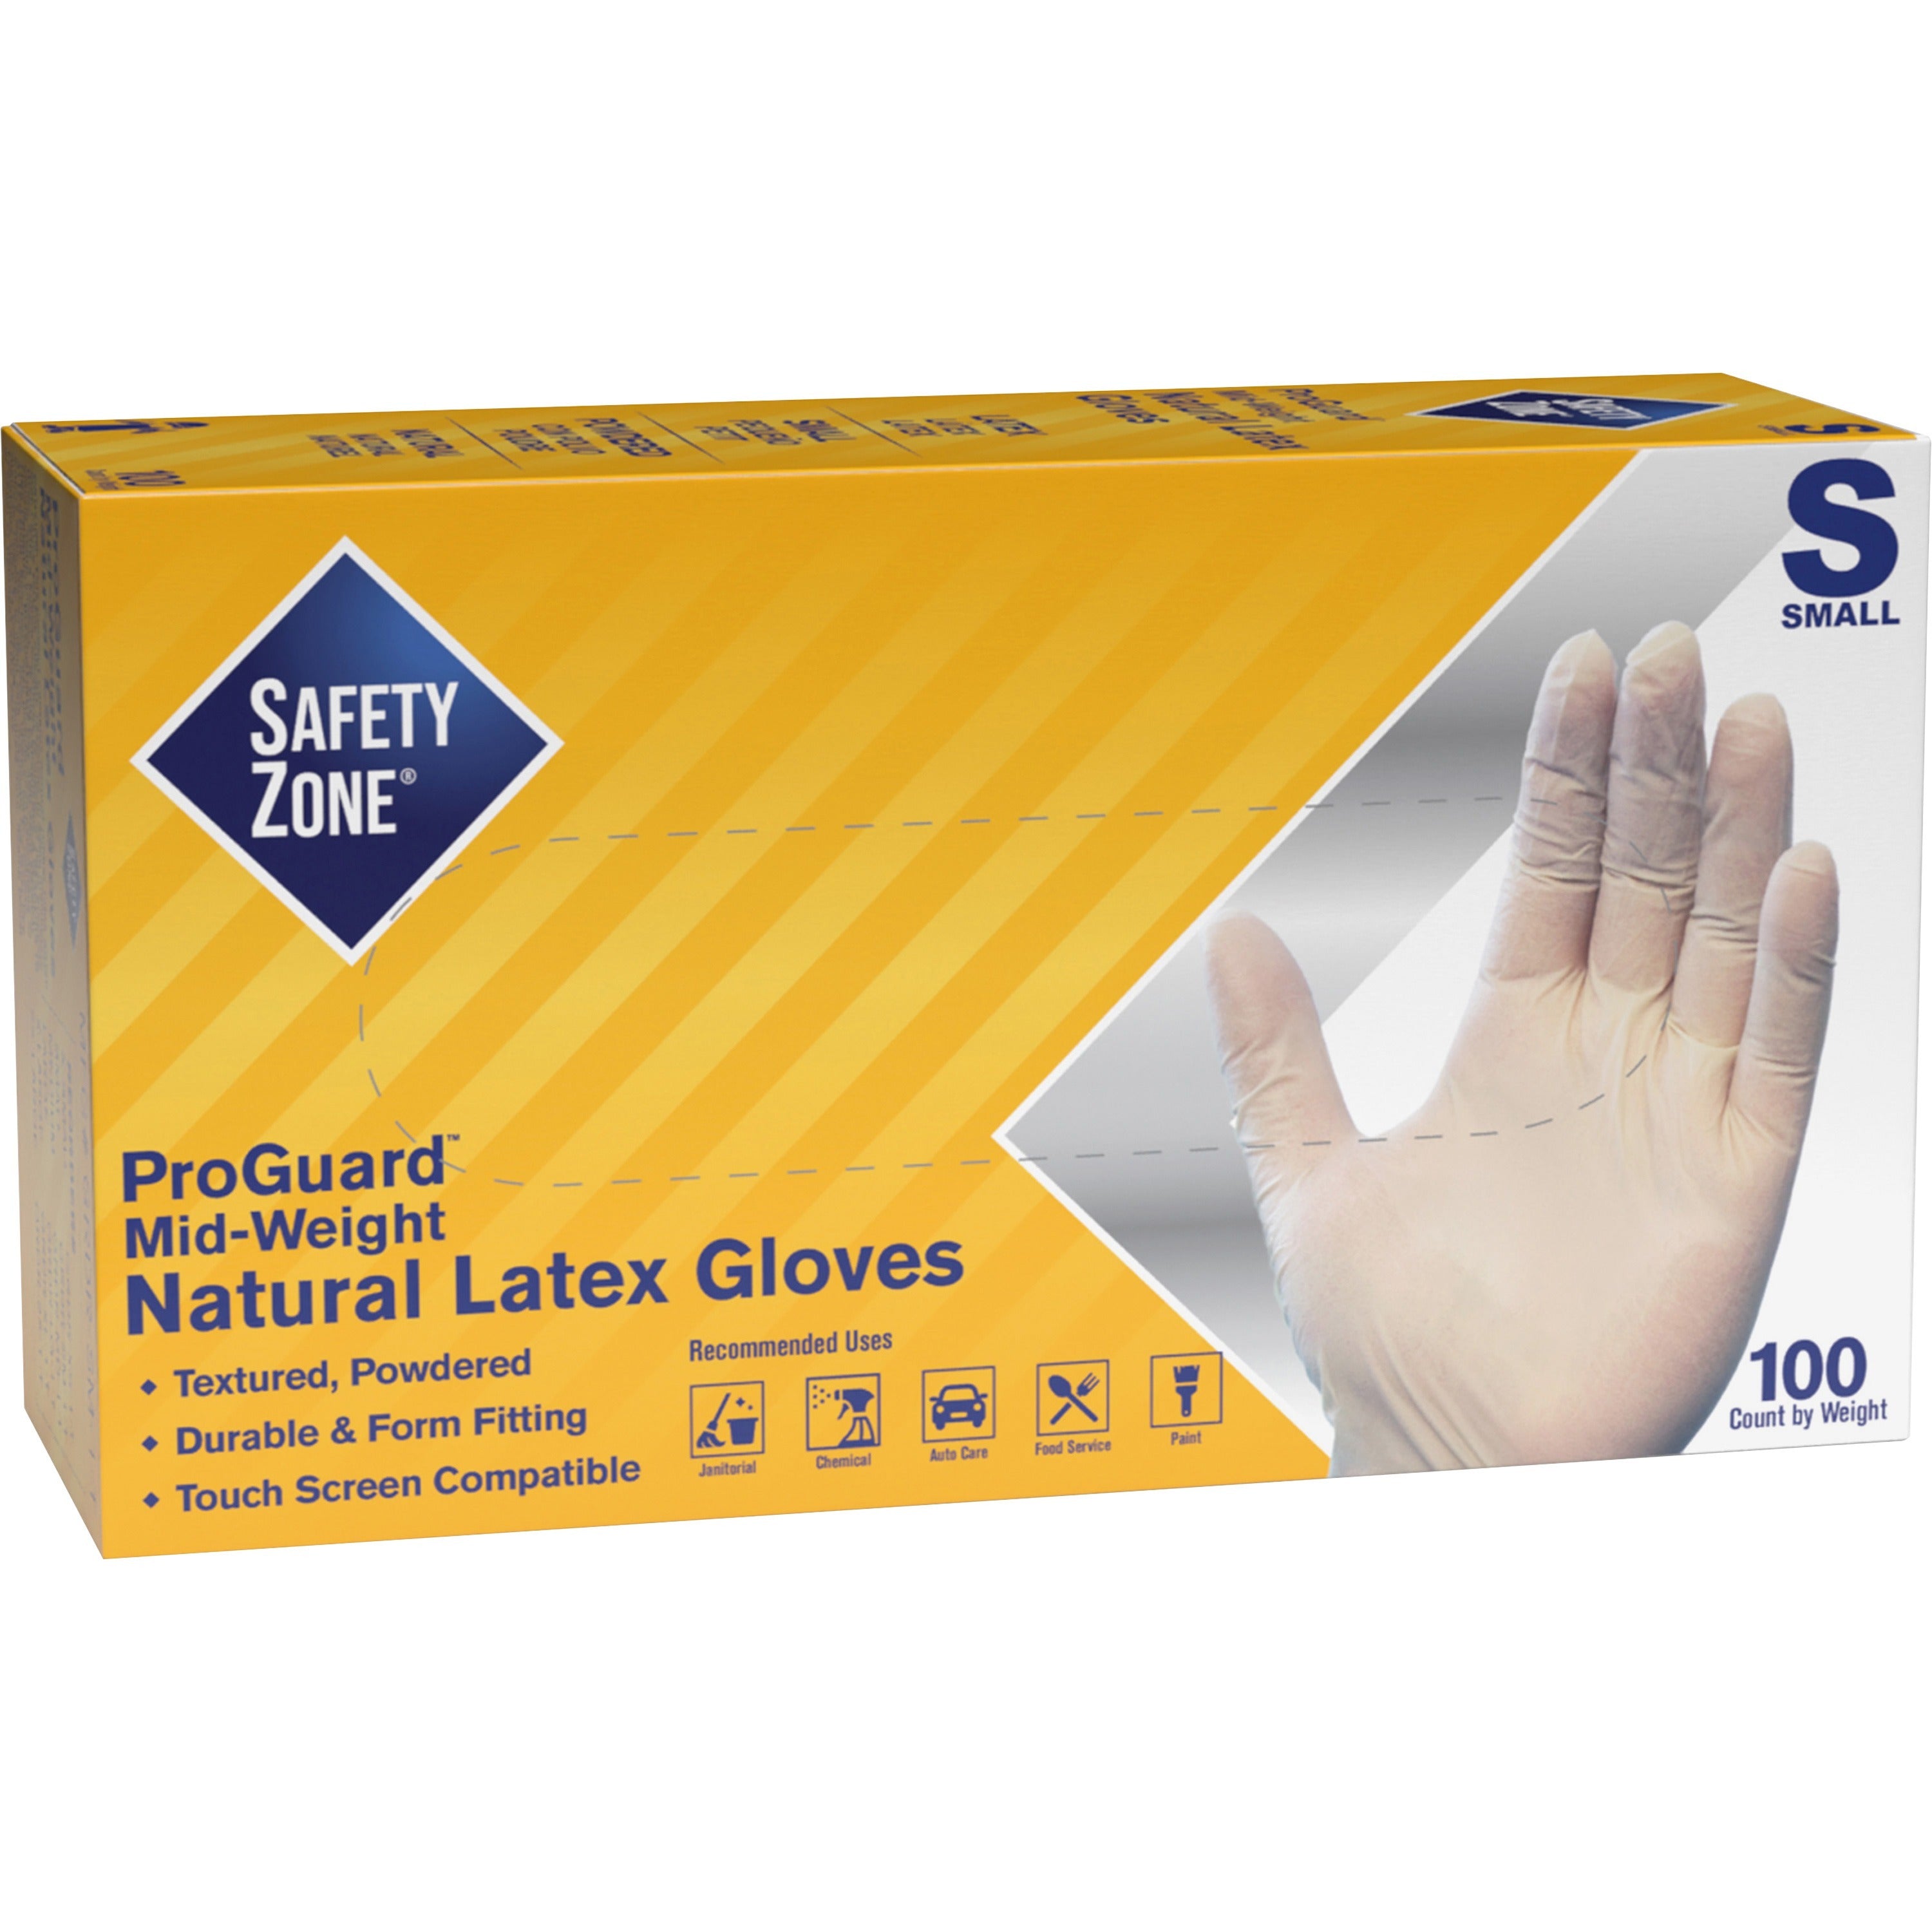 Safety Zone Powdered Natural Latex Gloves - Polymer Coating - Small Size - Natural - Allergen-free, Silicone-free, Powdered - 9.65" Glove Length